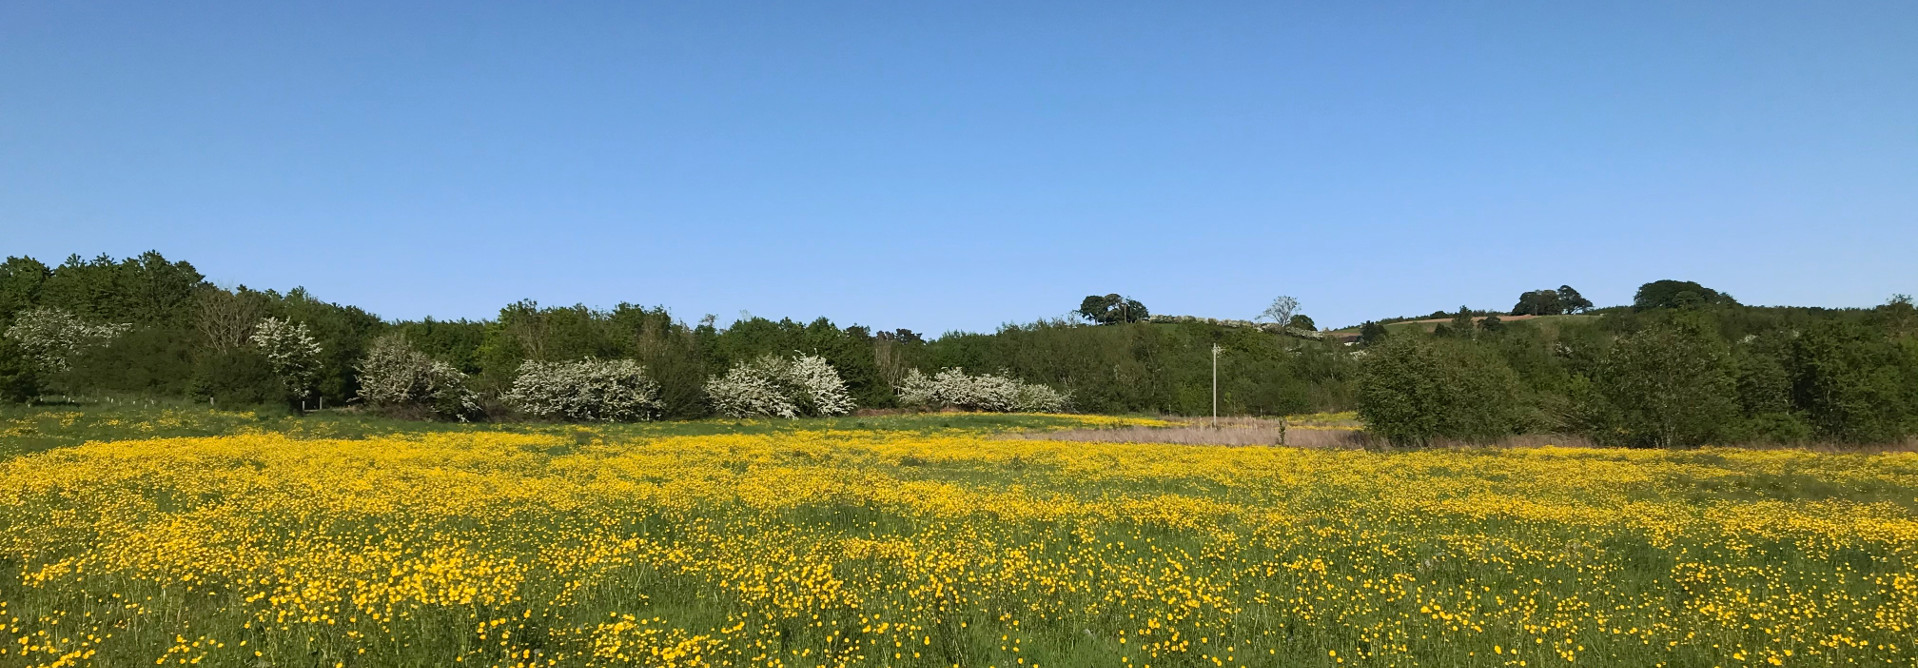 Buttercups in the National Forest near Hartshorne